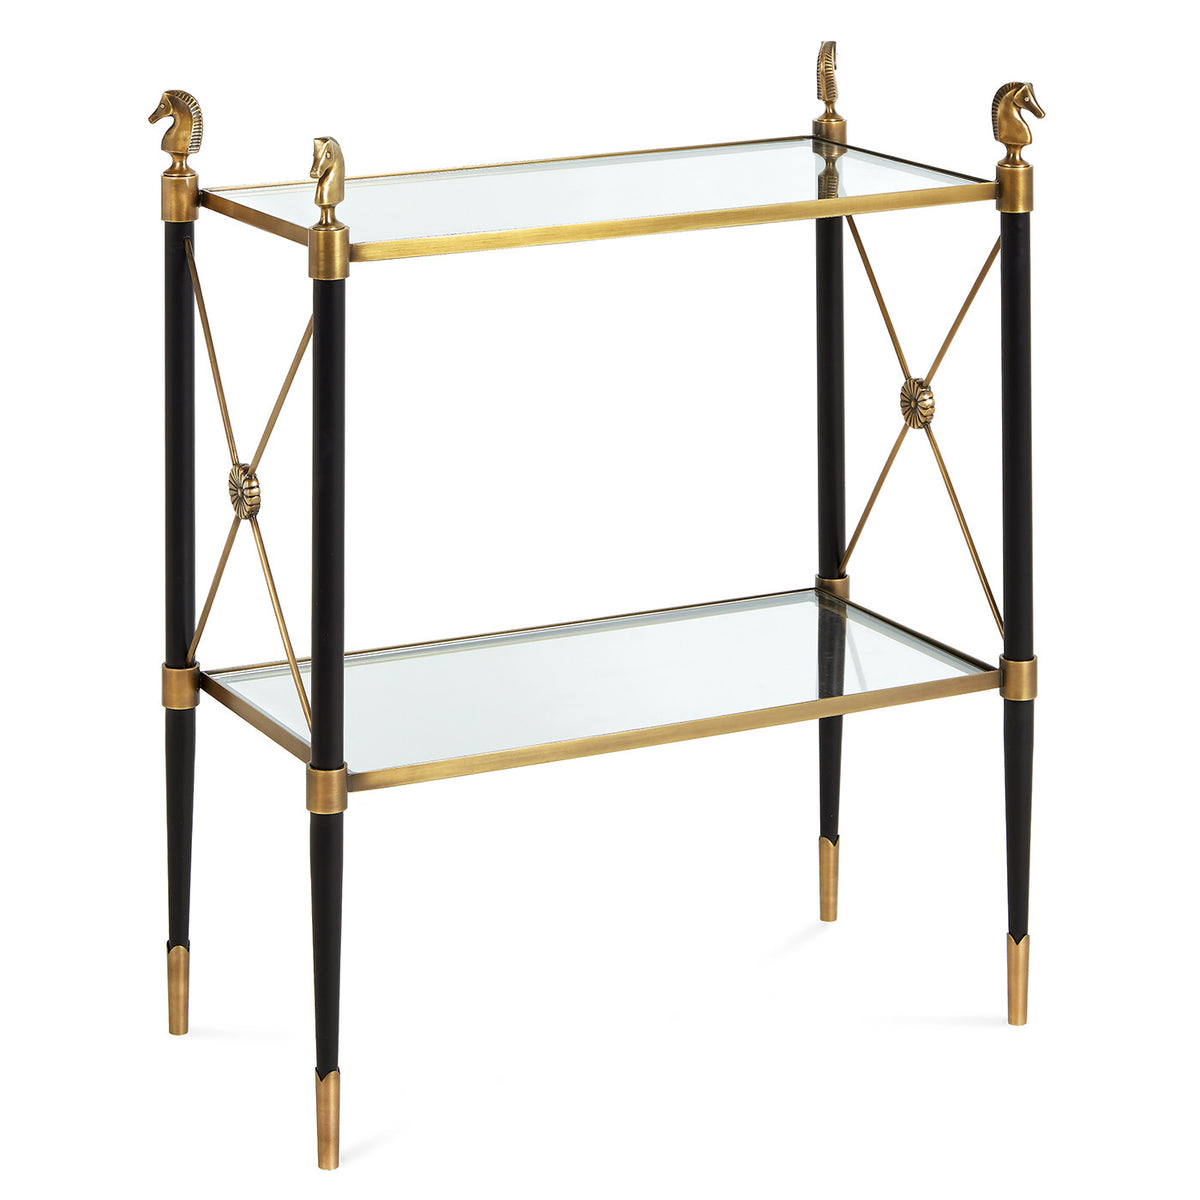 Rider Two Tier Side Table by Jonathan Adler